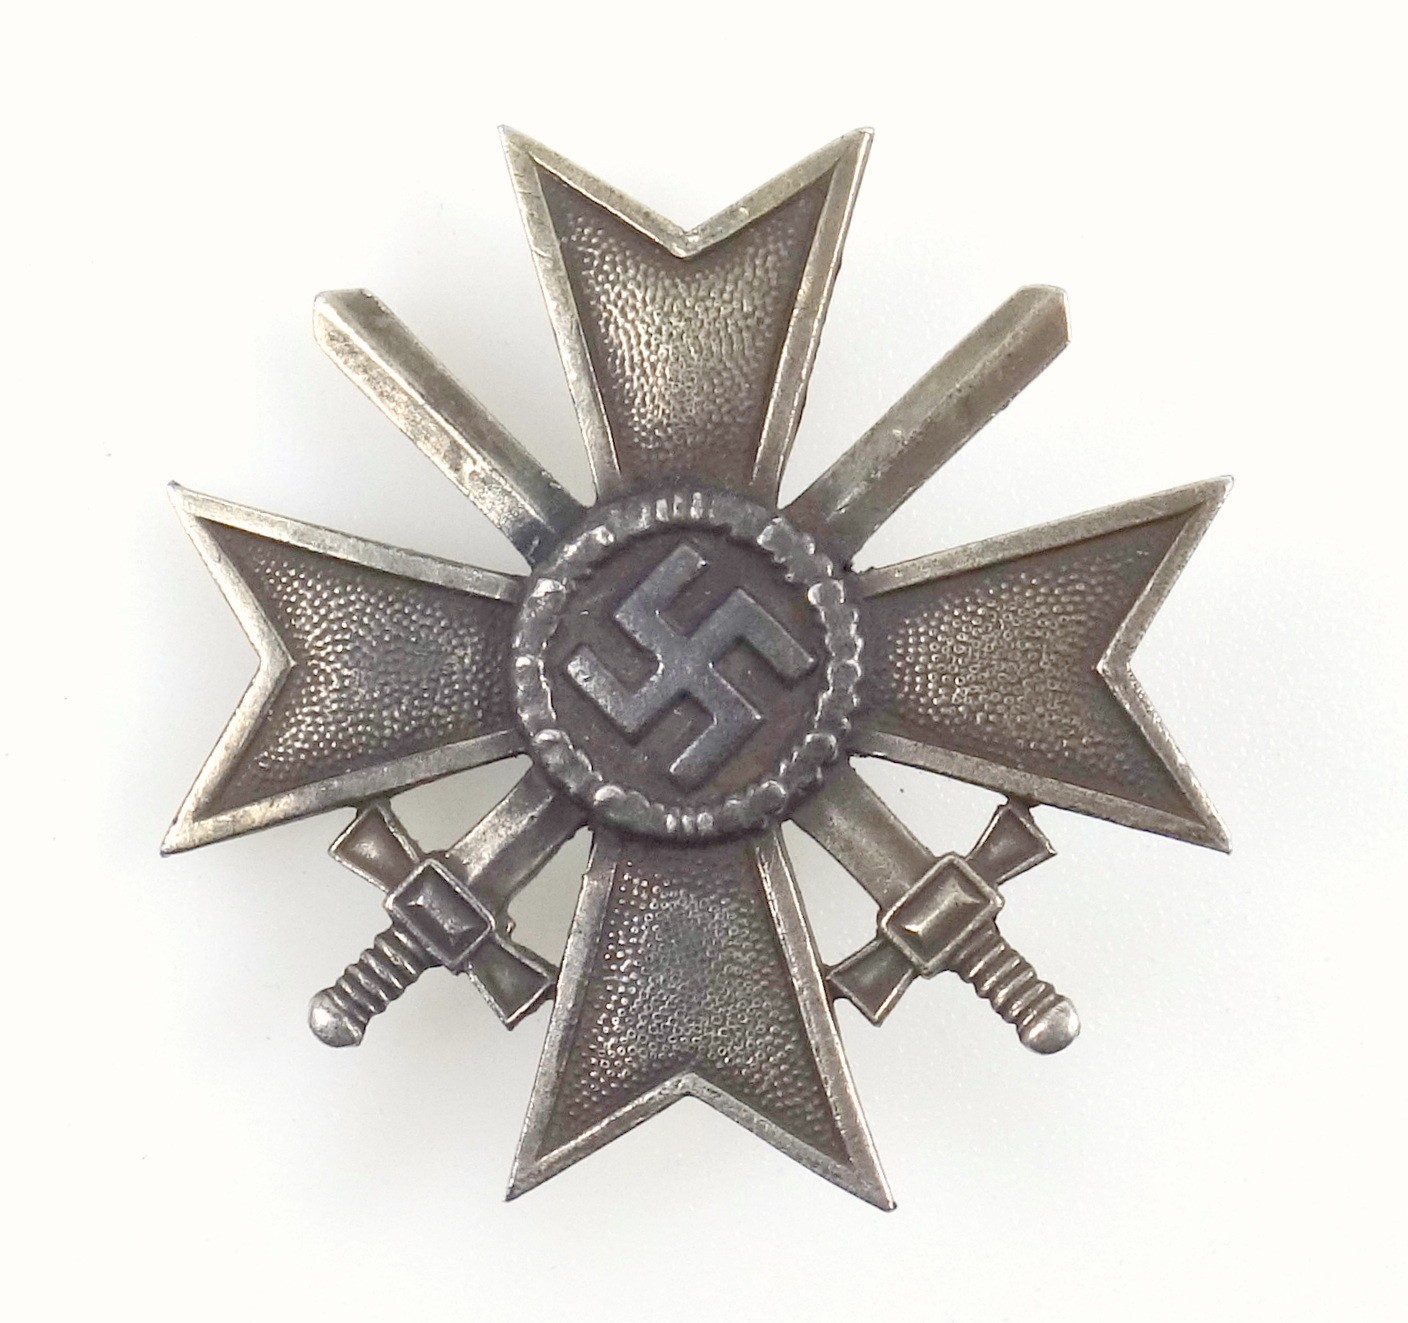 WW2 German War Merit Cross 1st Class with Swords, was awarded to military troops whose acts of